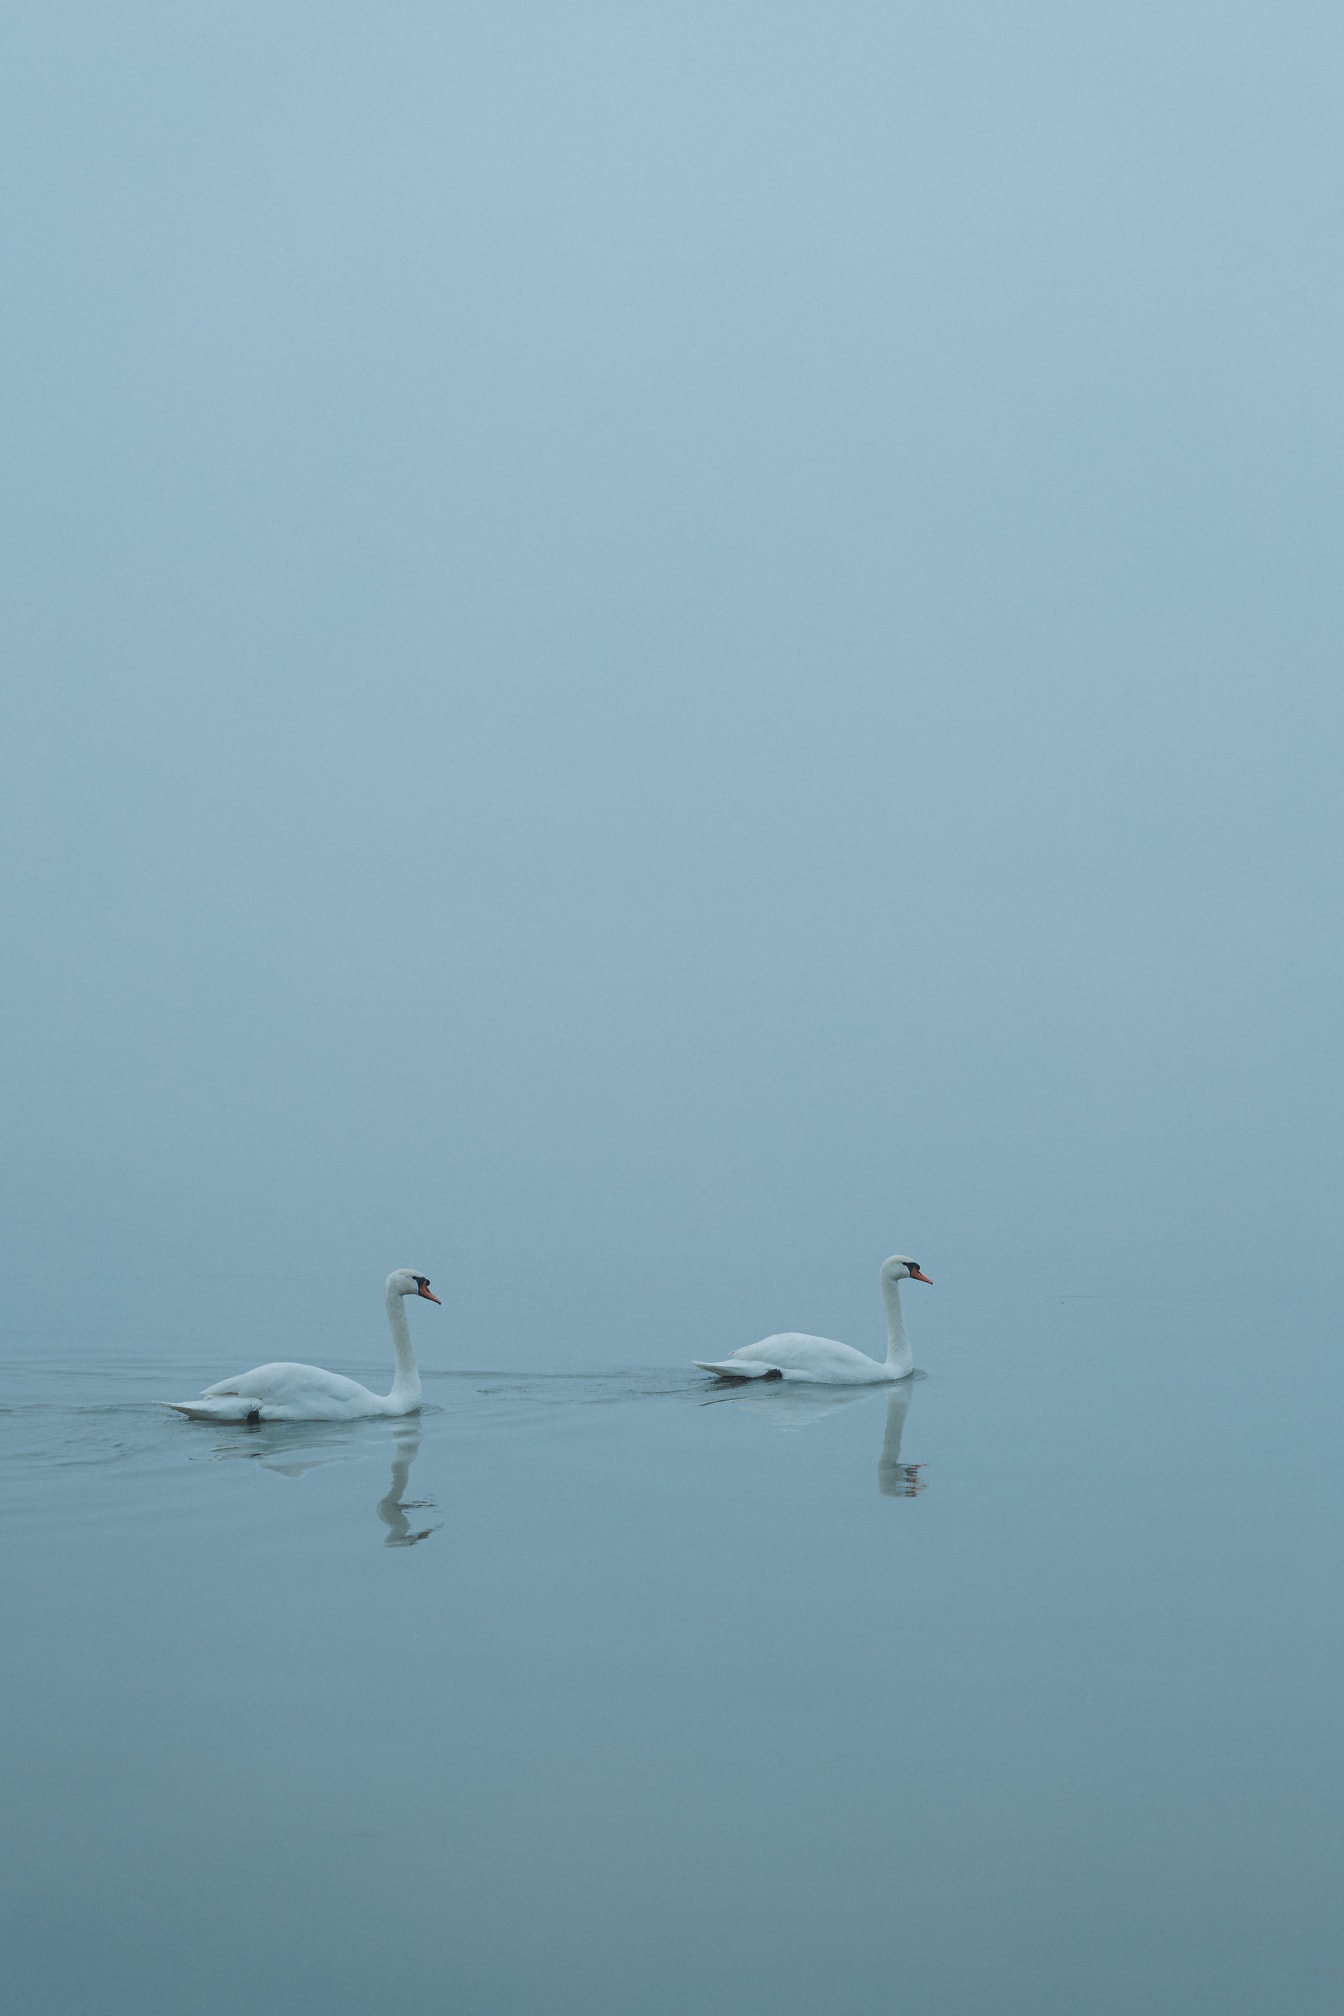 Two mute swans swimming on foggy day